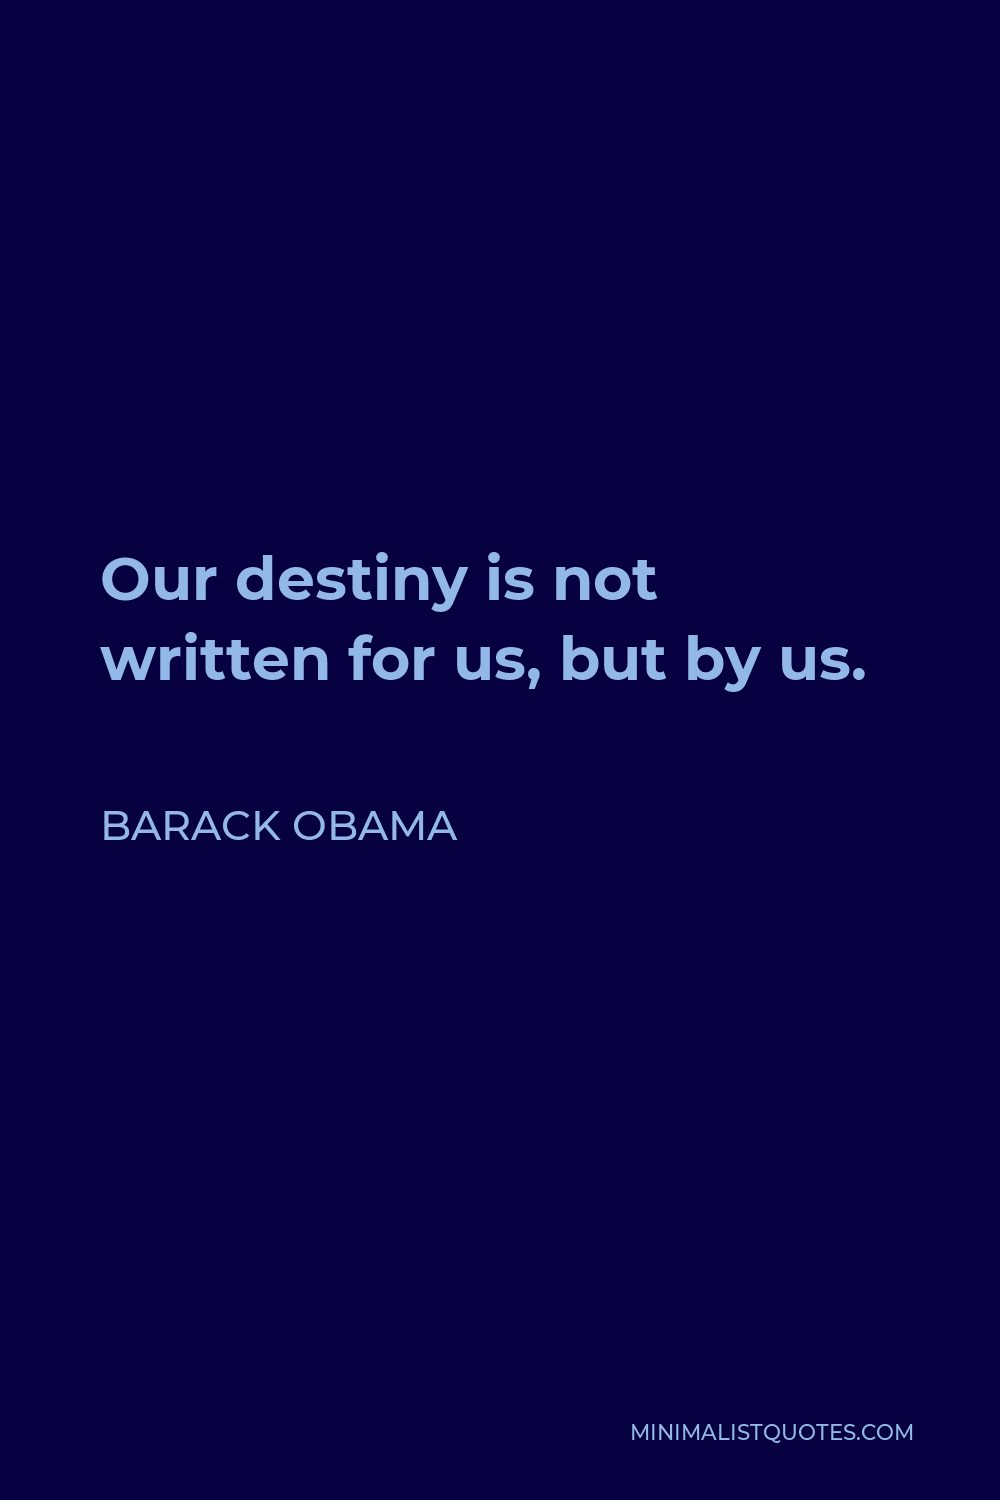 Barack Obama Quote - Our destiny is not written for us, but by us.